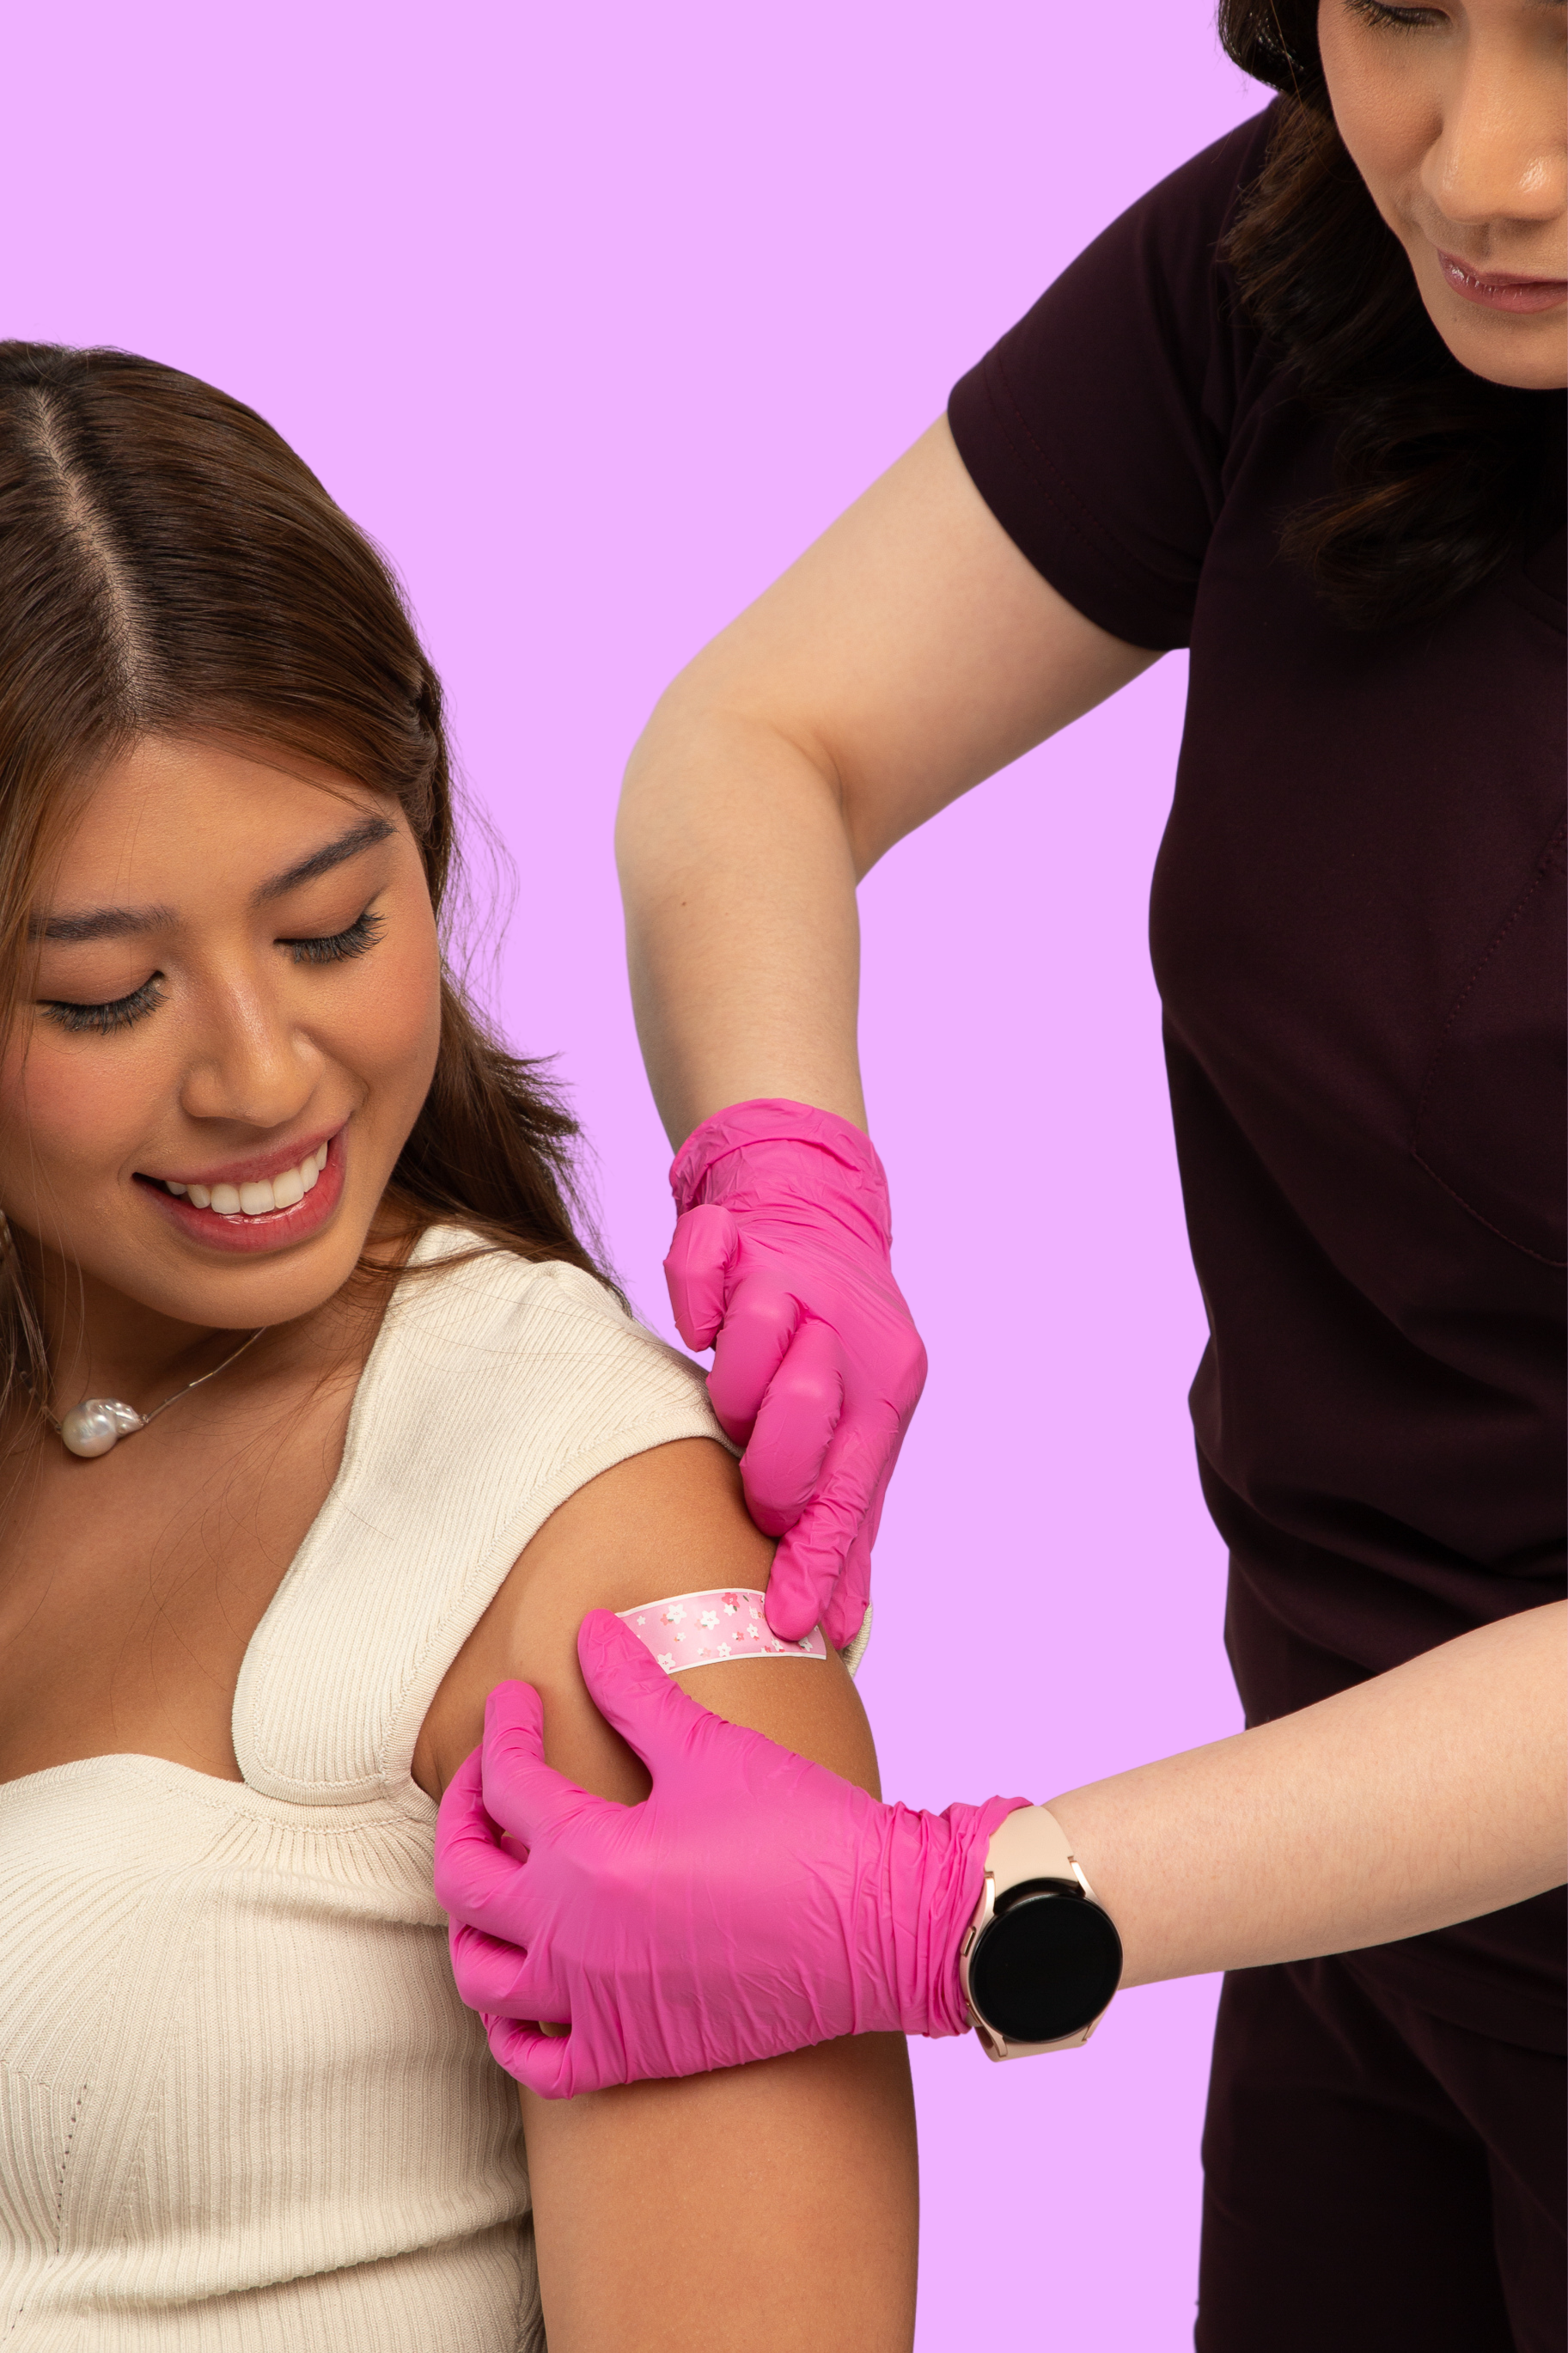 30% Off Vaccines at Kindred